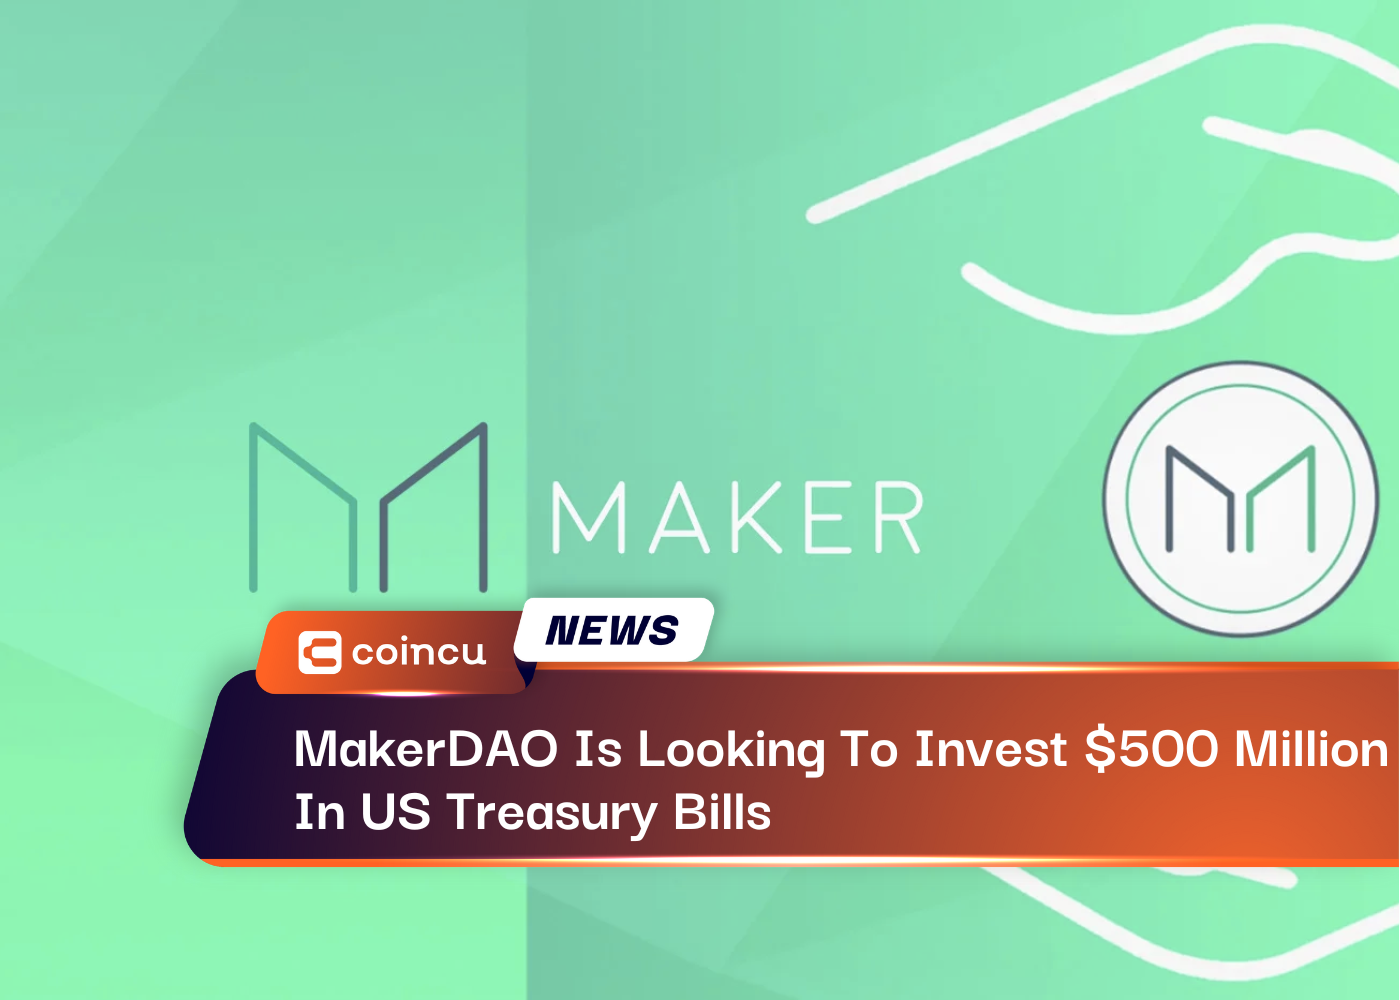 MakerDAO Is Looking To Invest $500 Million In US Treasury Bills